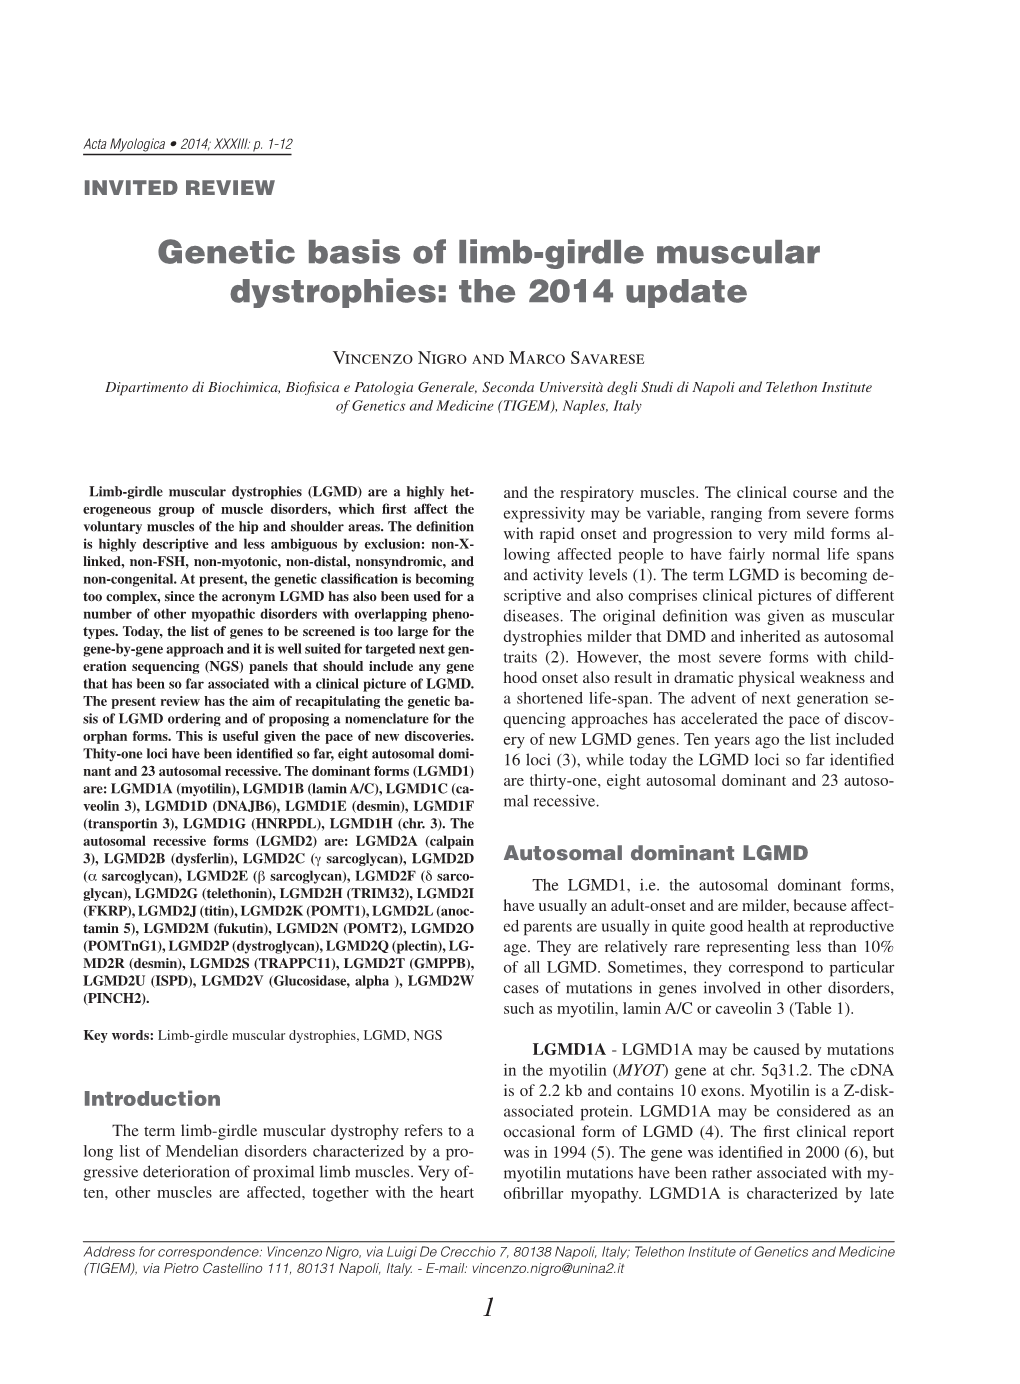 Genetic Basis of Limb-Girdle Muscular Dystrophies: the 2014 Update